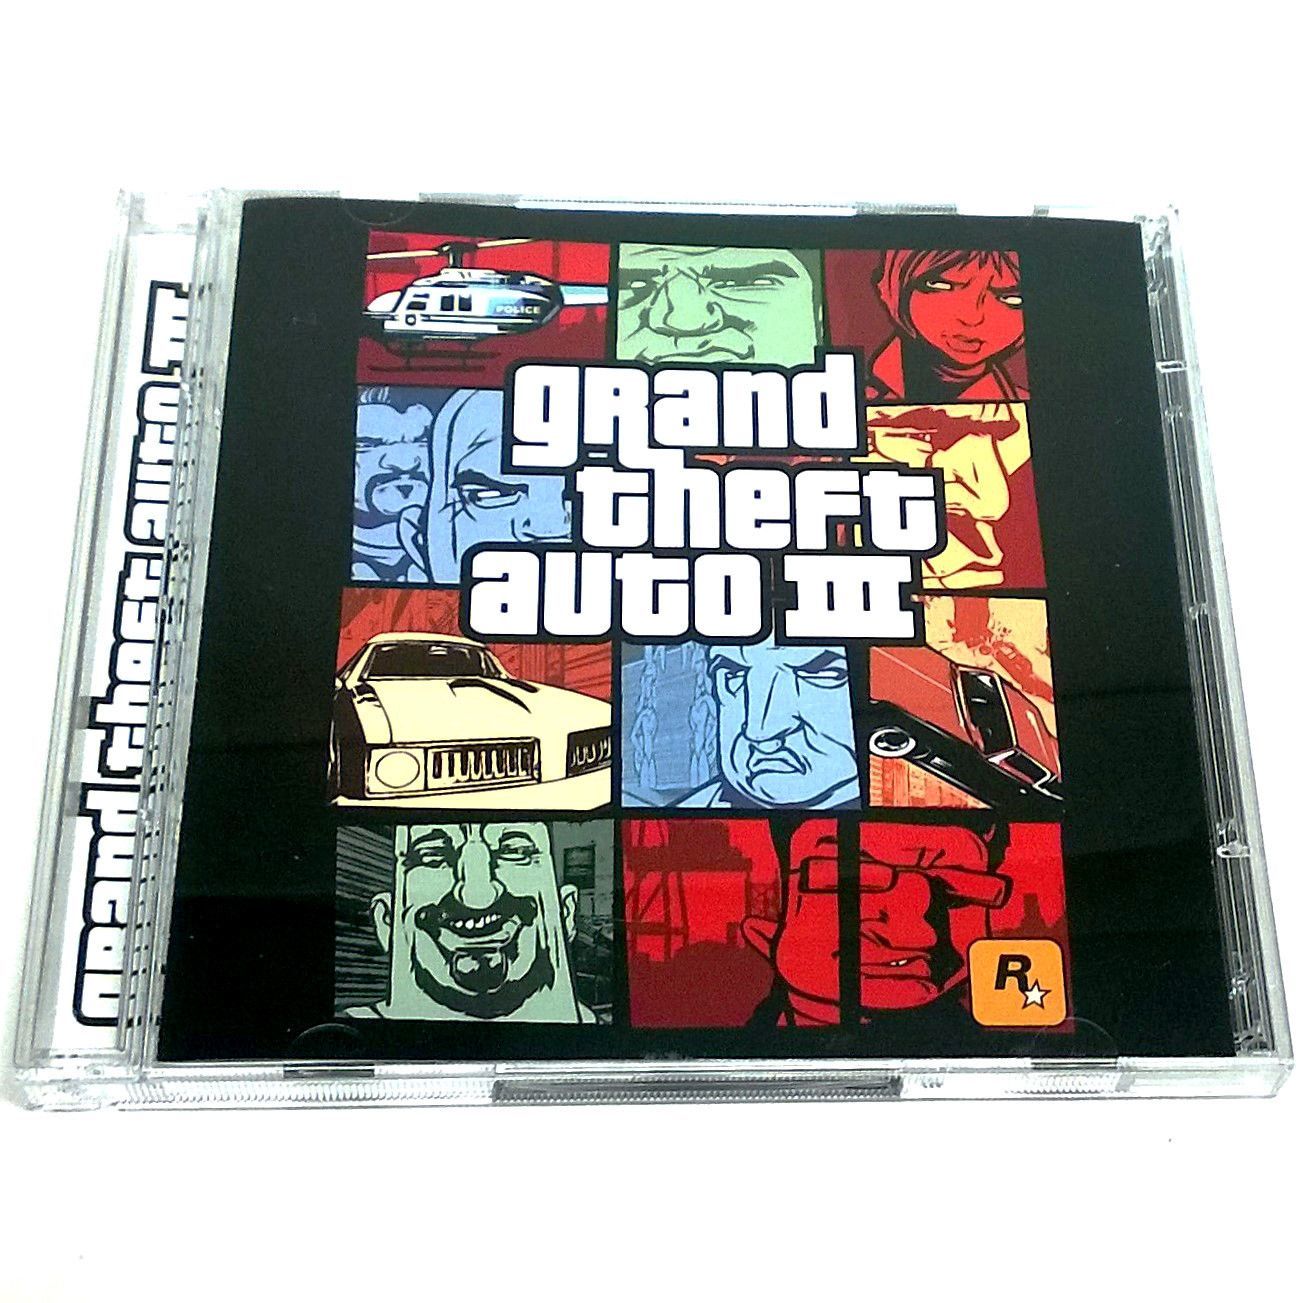 Grand Theft Auto III for PC CD-ROM - Front of case